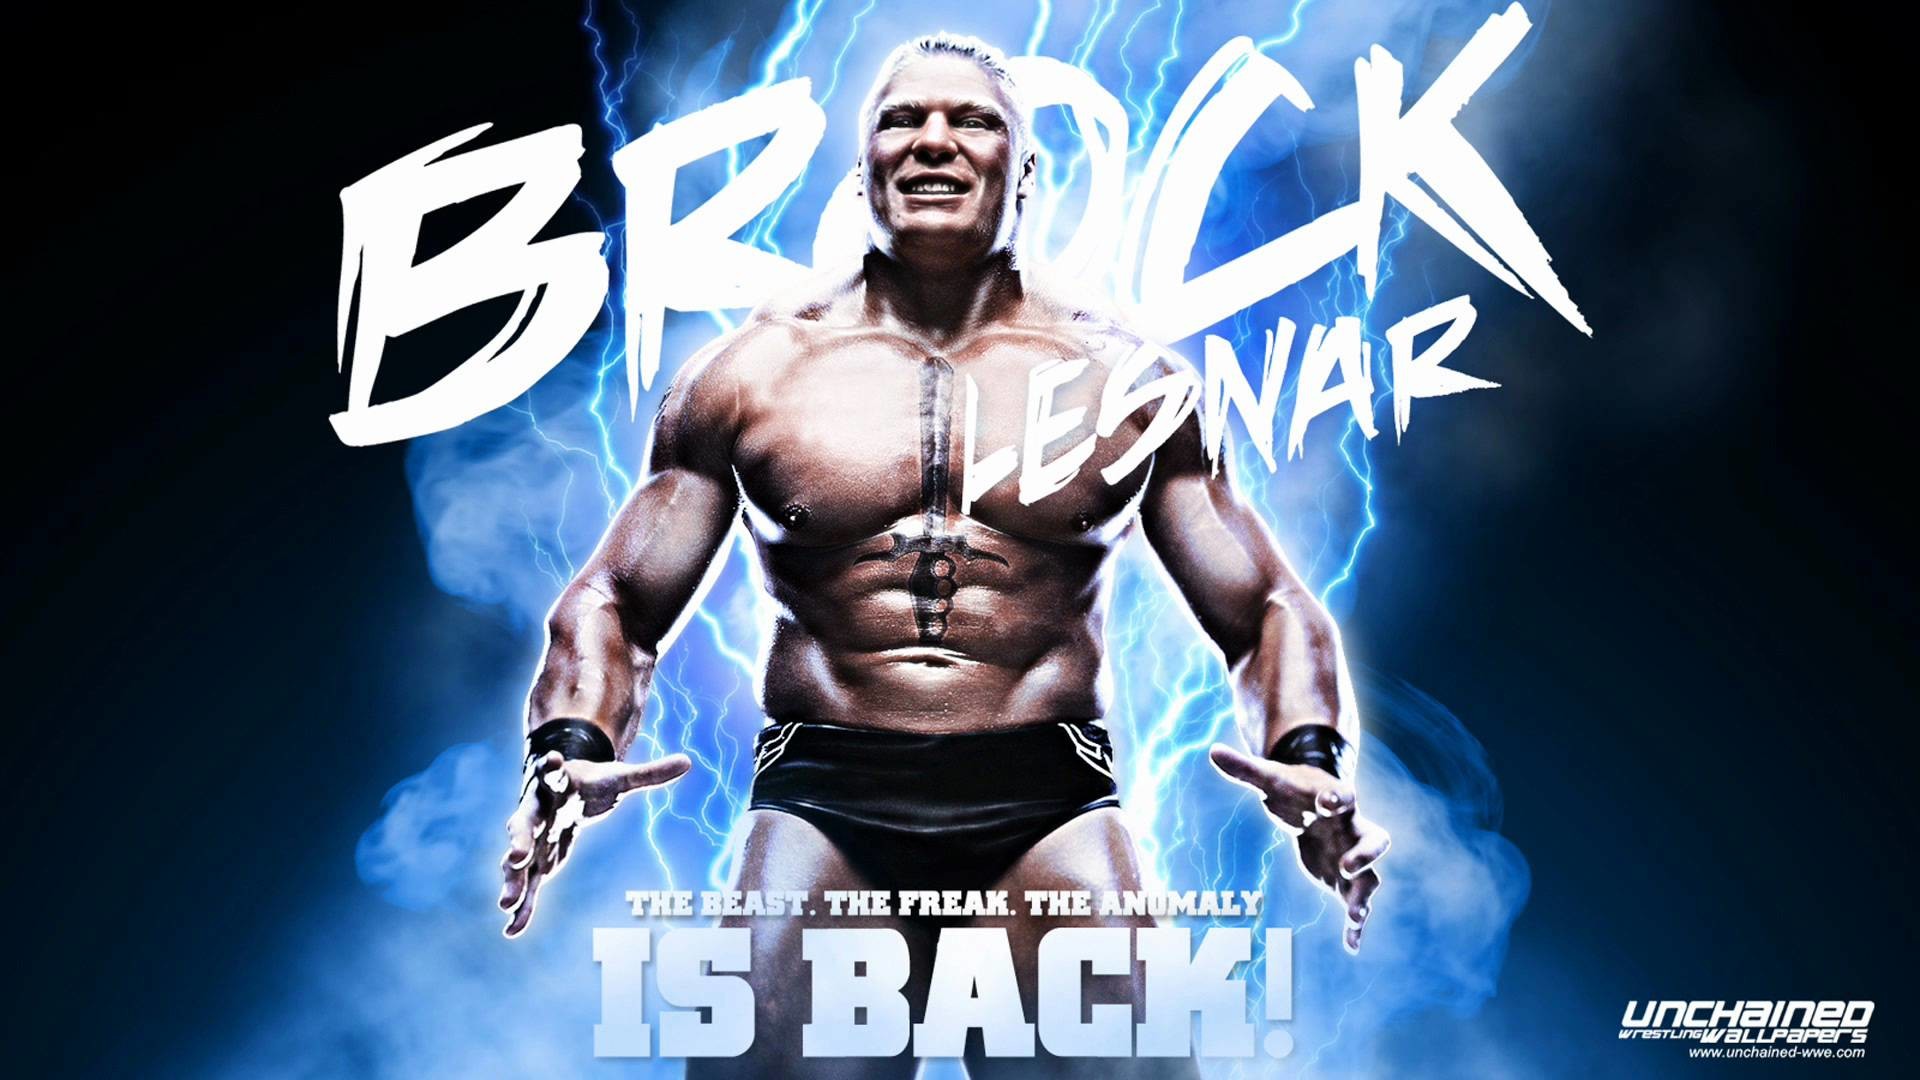 1920x1080 WWE Brock Lesnar 2012 Theme "Next Big Thing" by Jim Johnson HD With  Download Links - YouTube